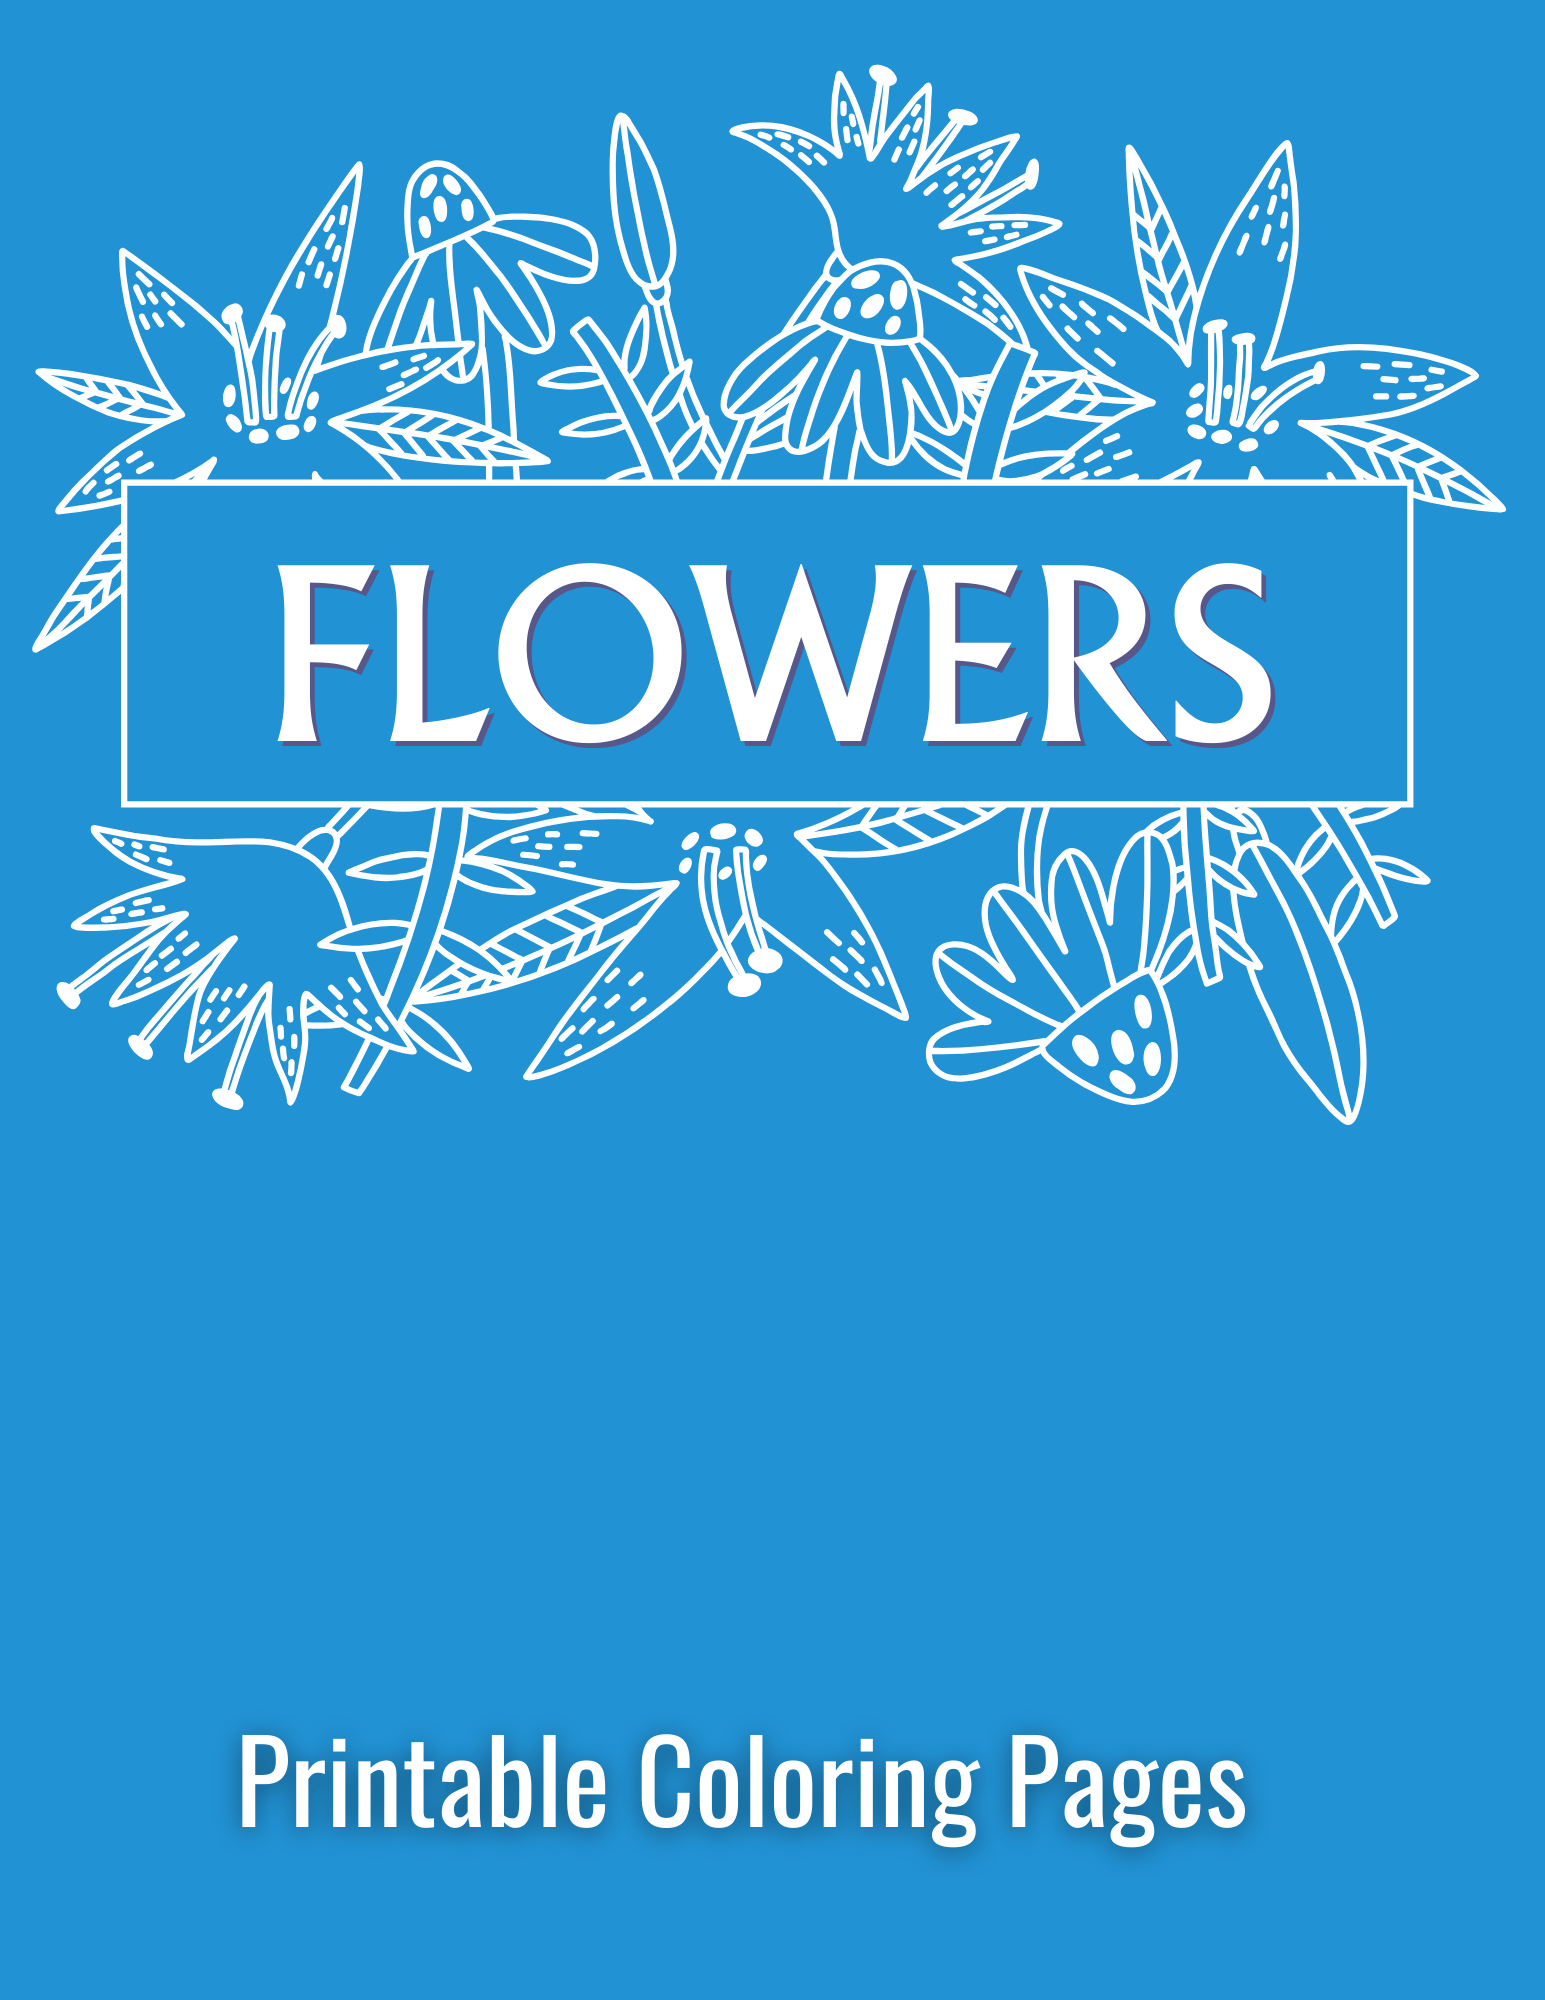 Printable (Digital) Flowers Coloring Pages: BlossomArt Coloring Collection